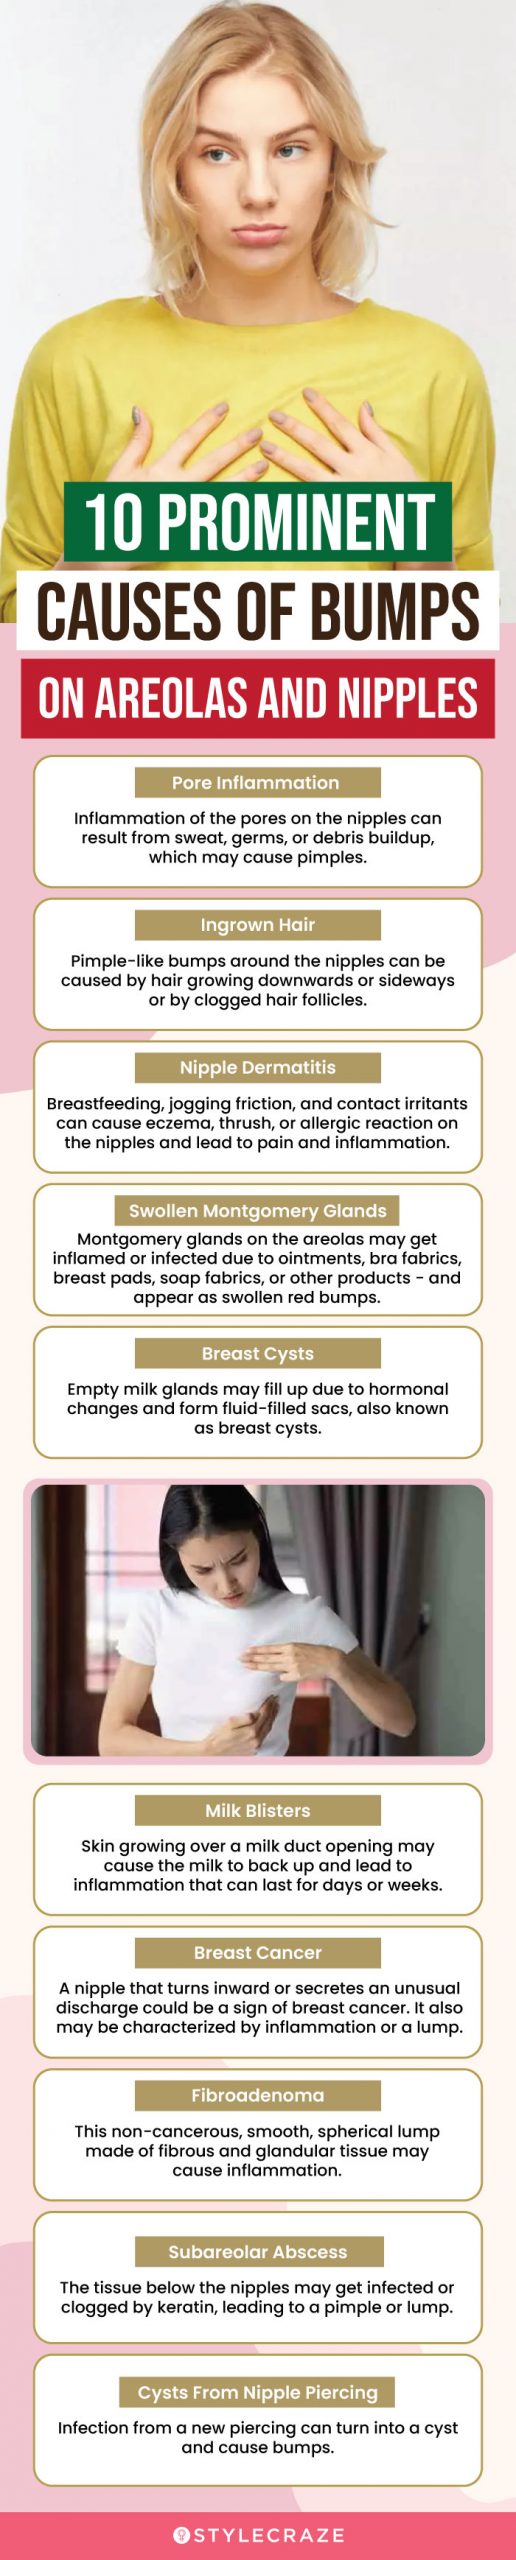 10 prominent causes of bumps on areolas and nipples (infographic)